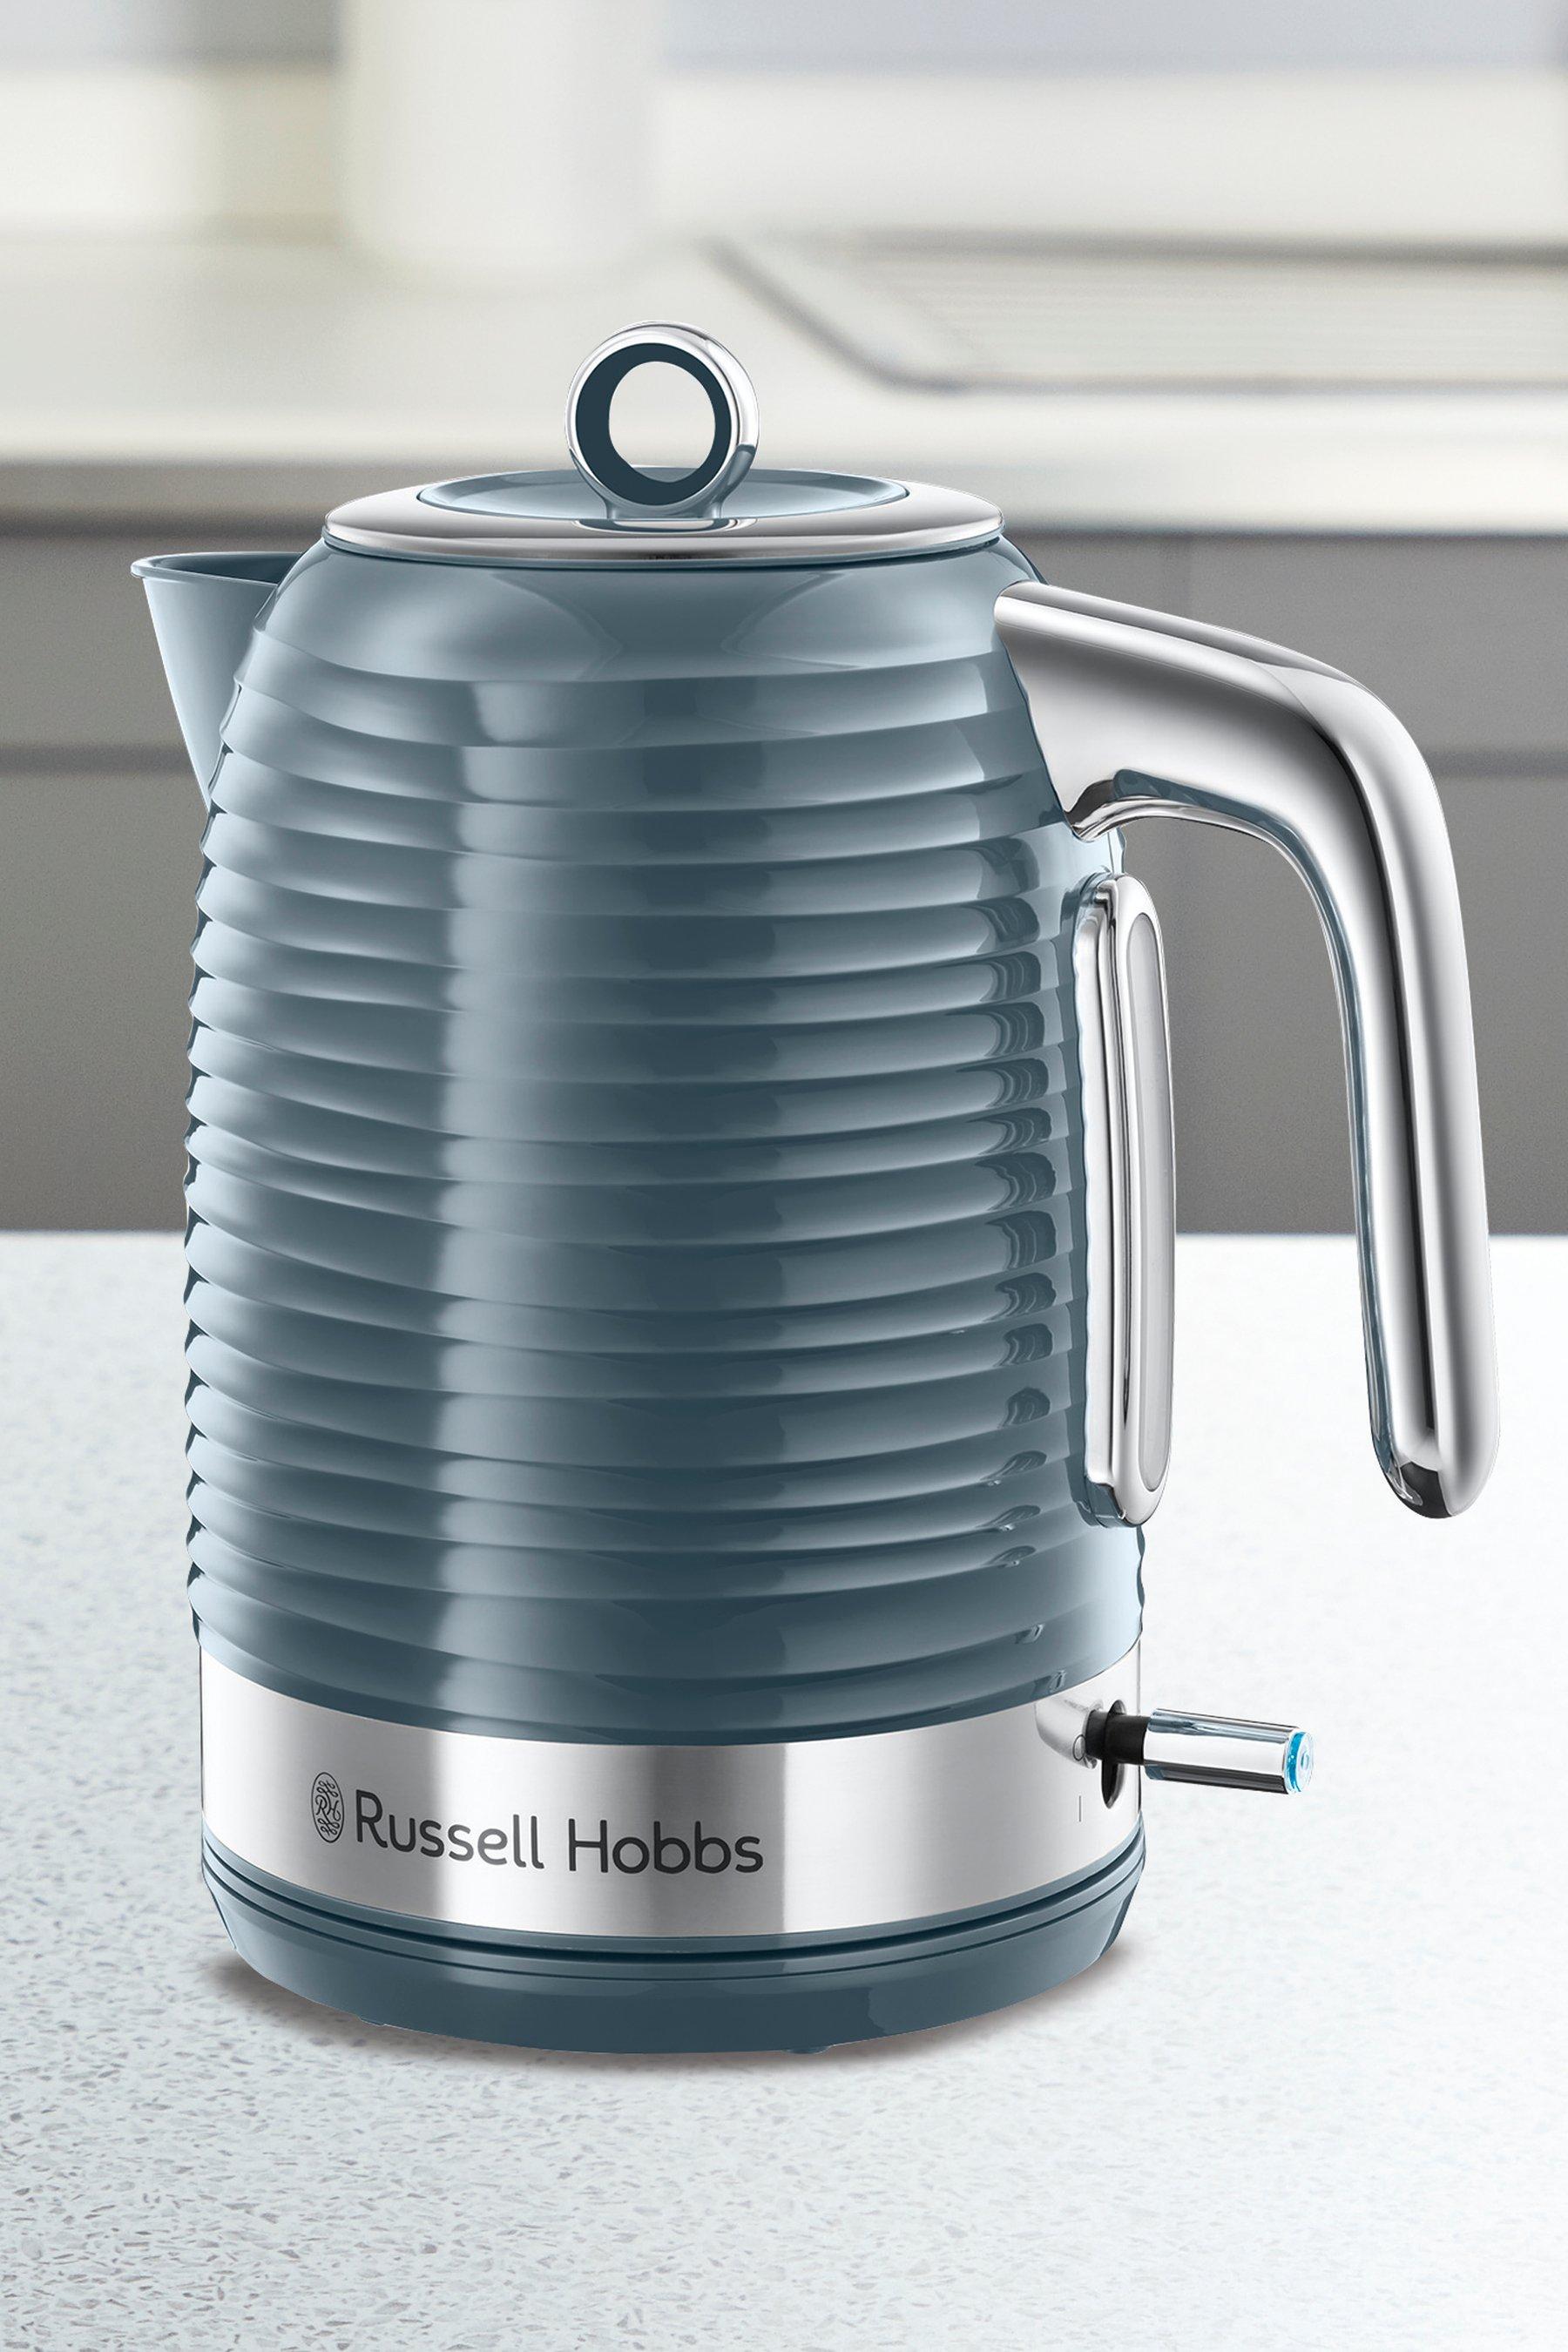 Russell Hobbs 1.7L Inspire Electric Kettle, 24364, Cream